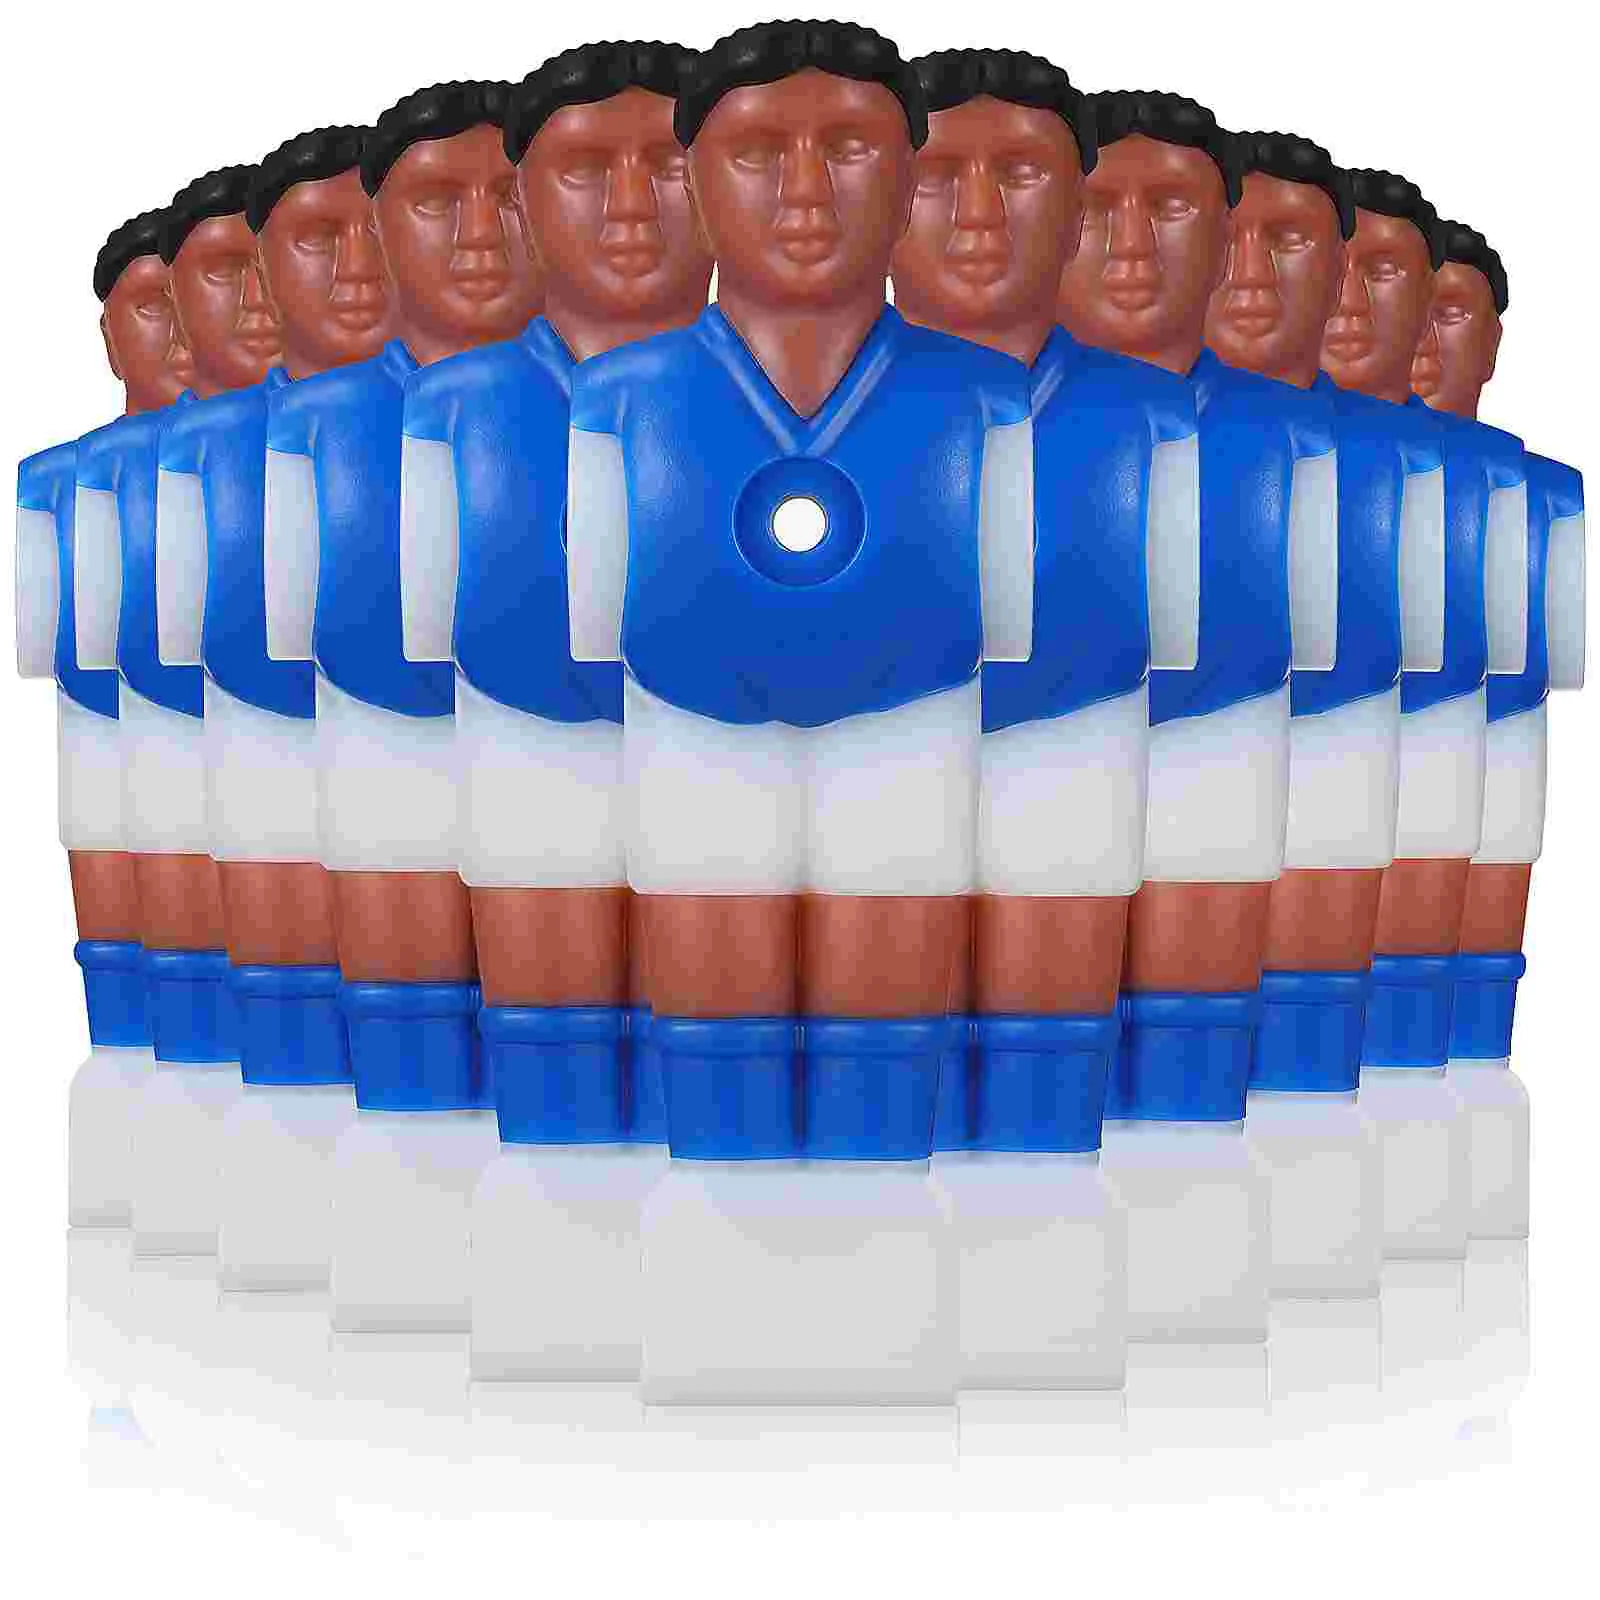 11 Pcs Creative Resin Well Constructed Table Football Figures Table Football Figures Table Football Figurines